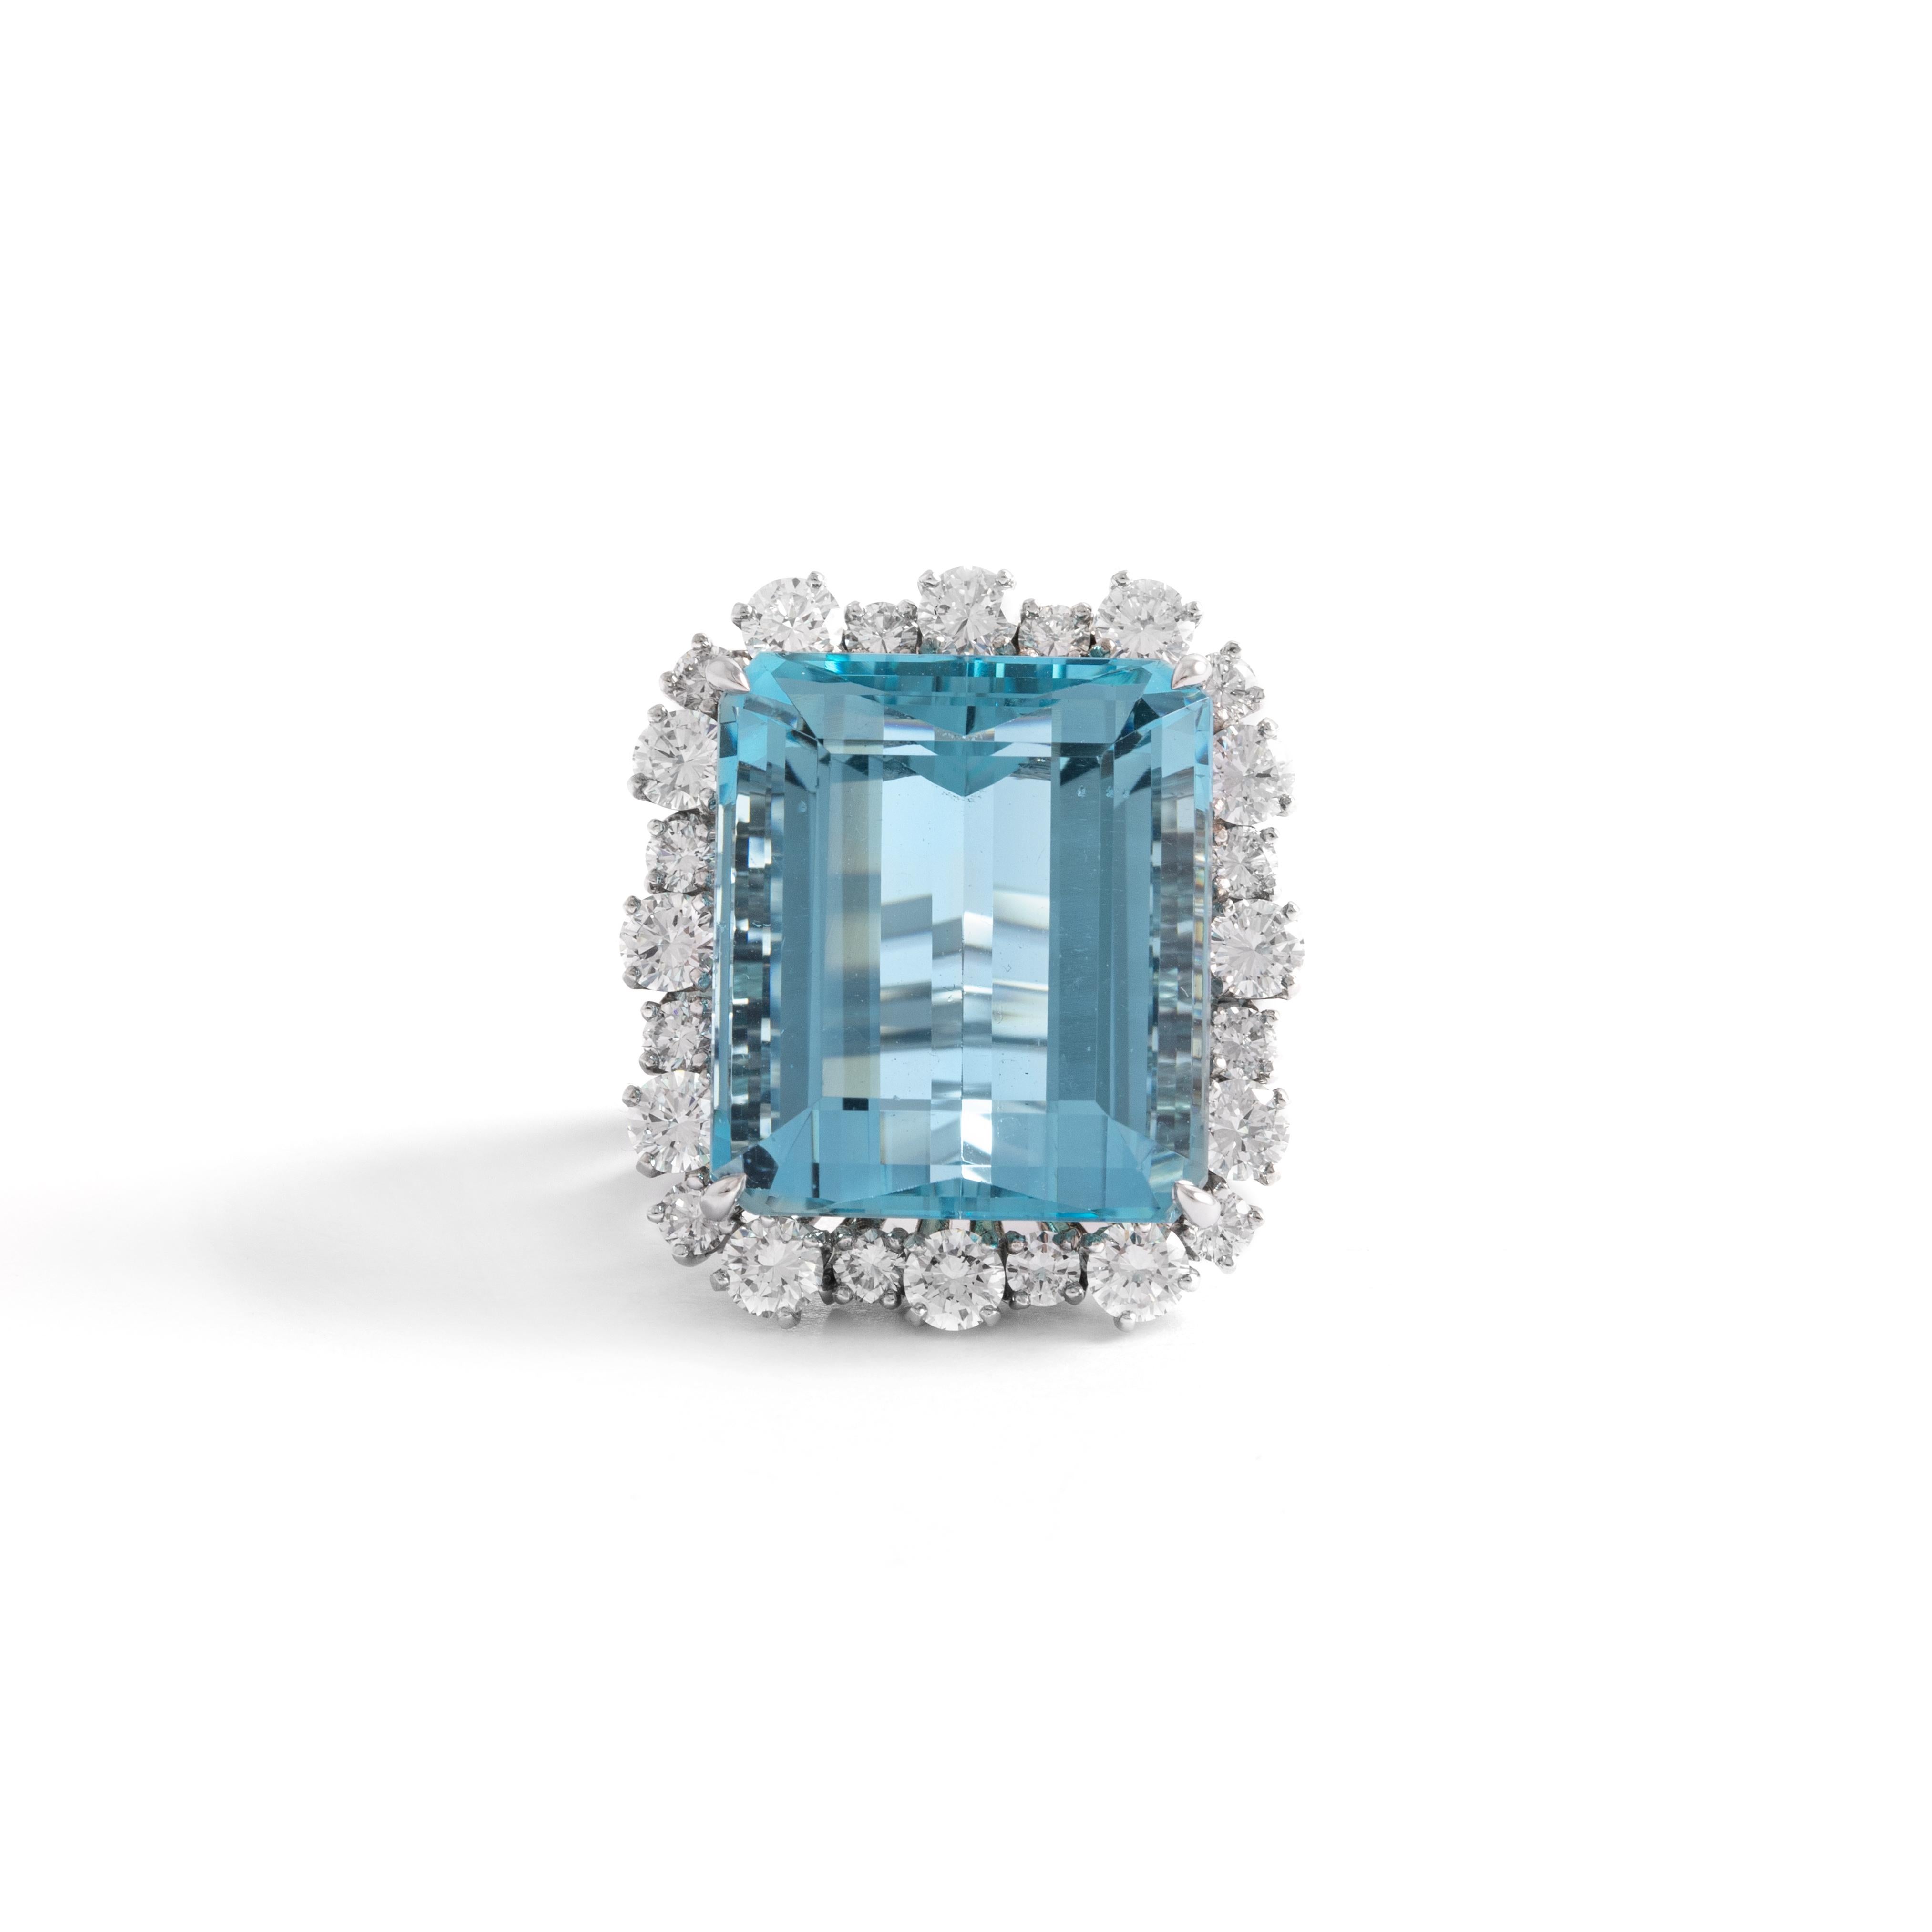 Ring set with 24 diamonds and one significant Aquamarine.
Aquamarine Size: 1.75cm x 2.00 cm.
Weight: 24.47 grammes.
Ring Size: 55 / 7 US.
